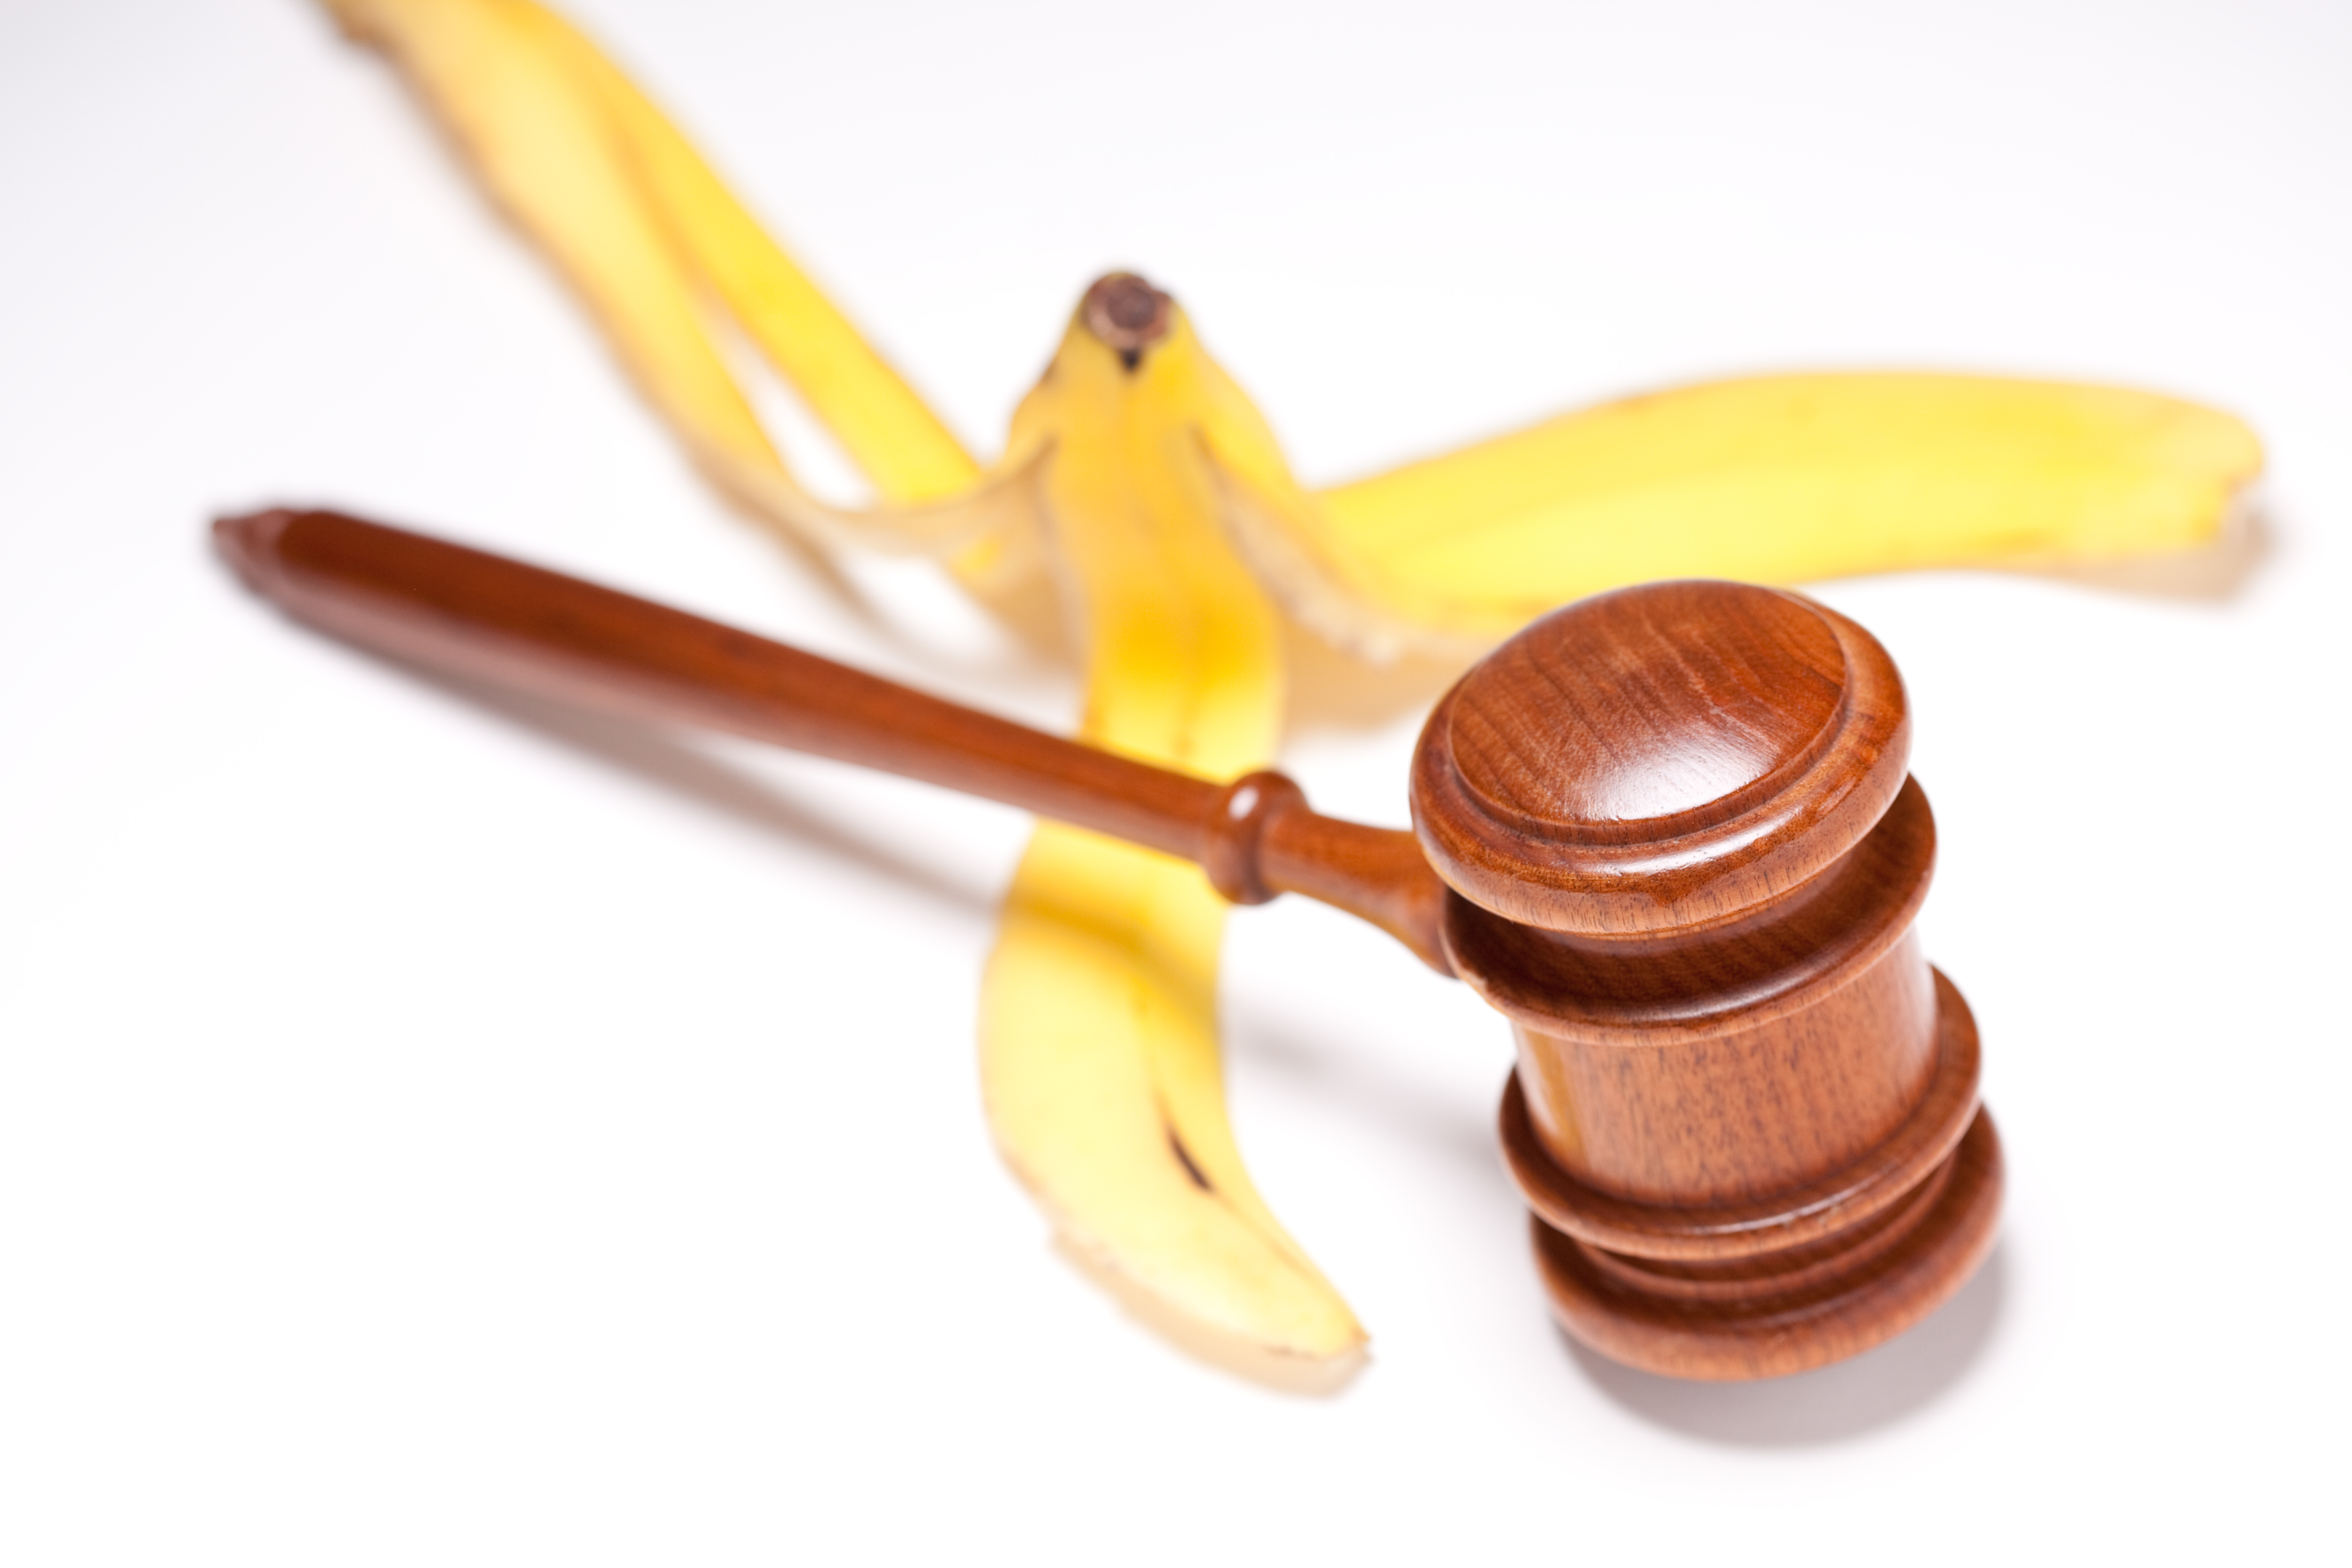 "Slipping on fiduciary duties in California: seeking justice with the gavel's strike."